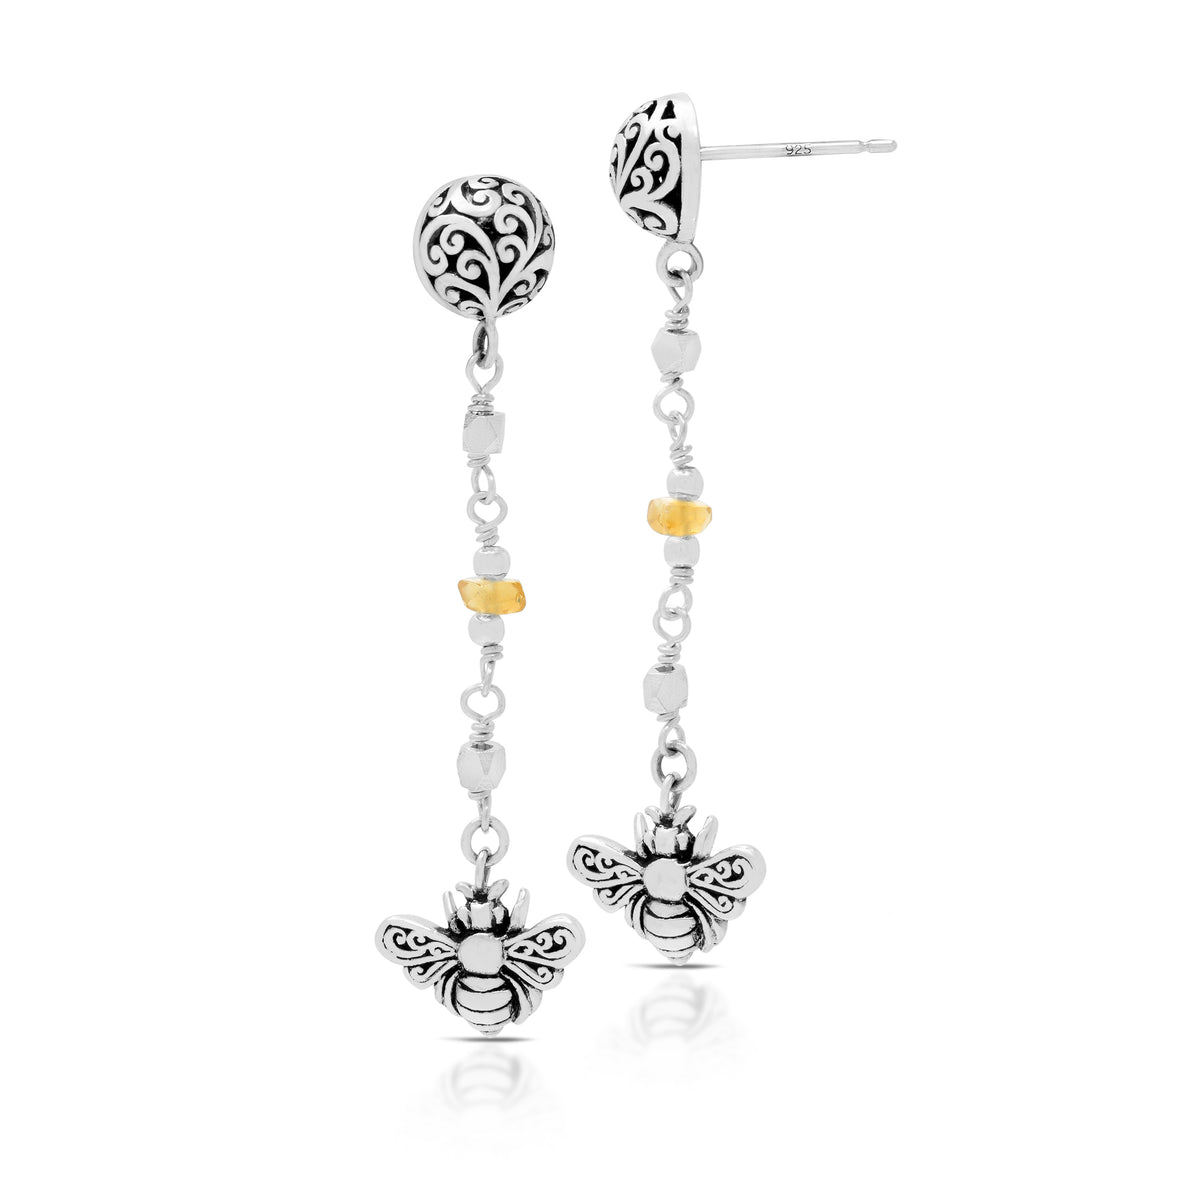 Faceted Citrine Beads with LH Scroll Bee Drop Dangle Post Earrings